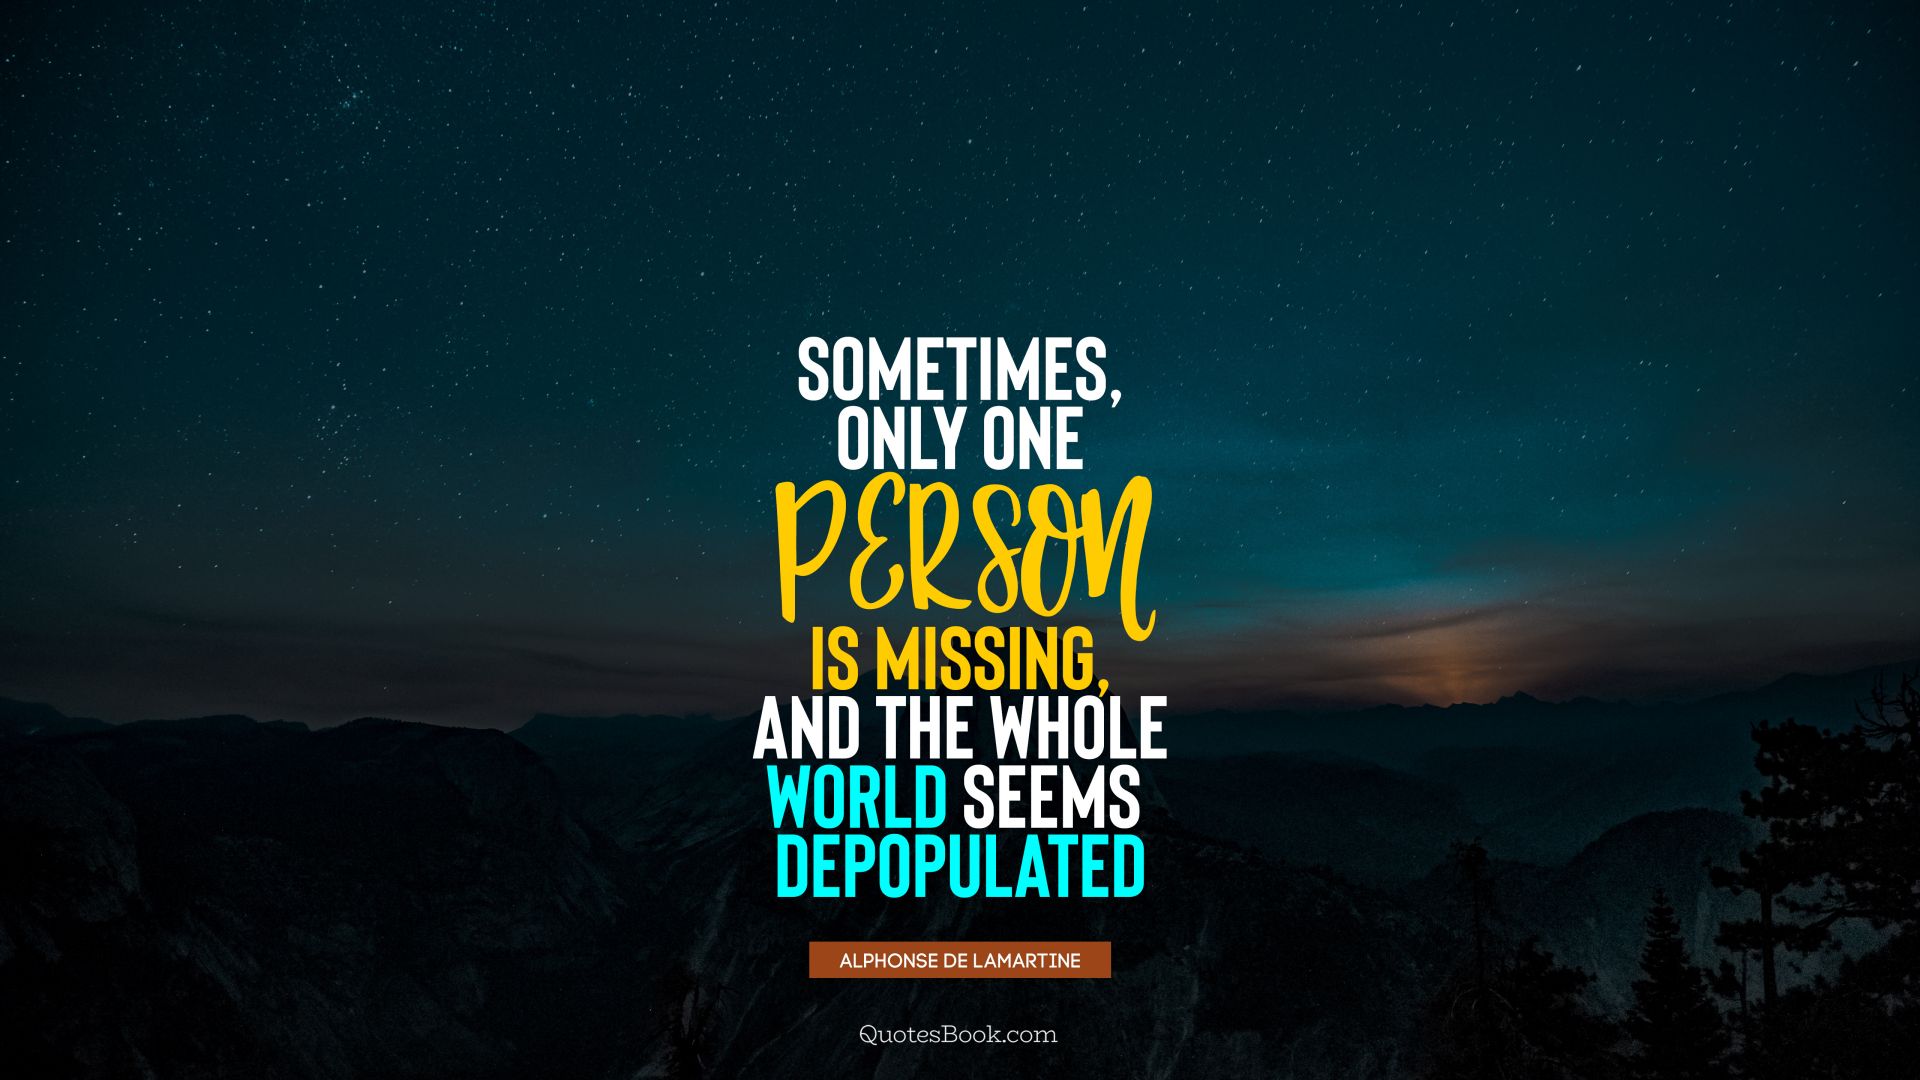 Sometimes, only one person is missing, and the whole world seems depopulated. - Quote by Alphonse de Lamartine